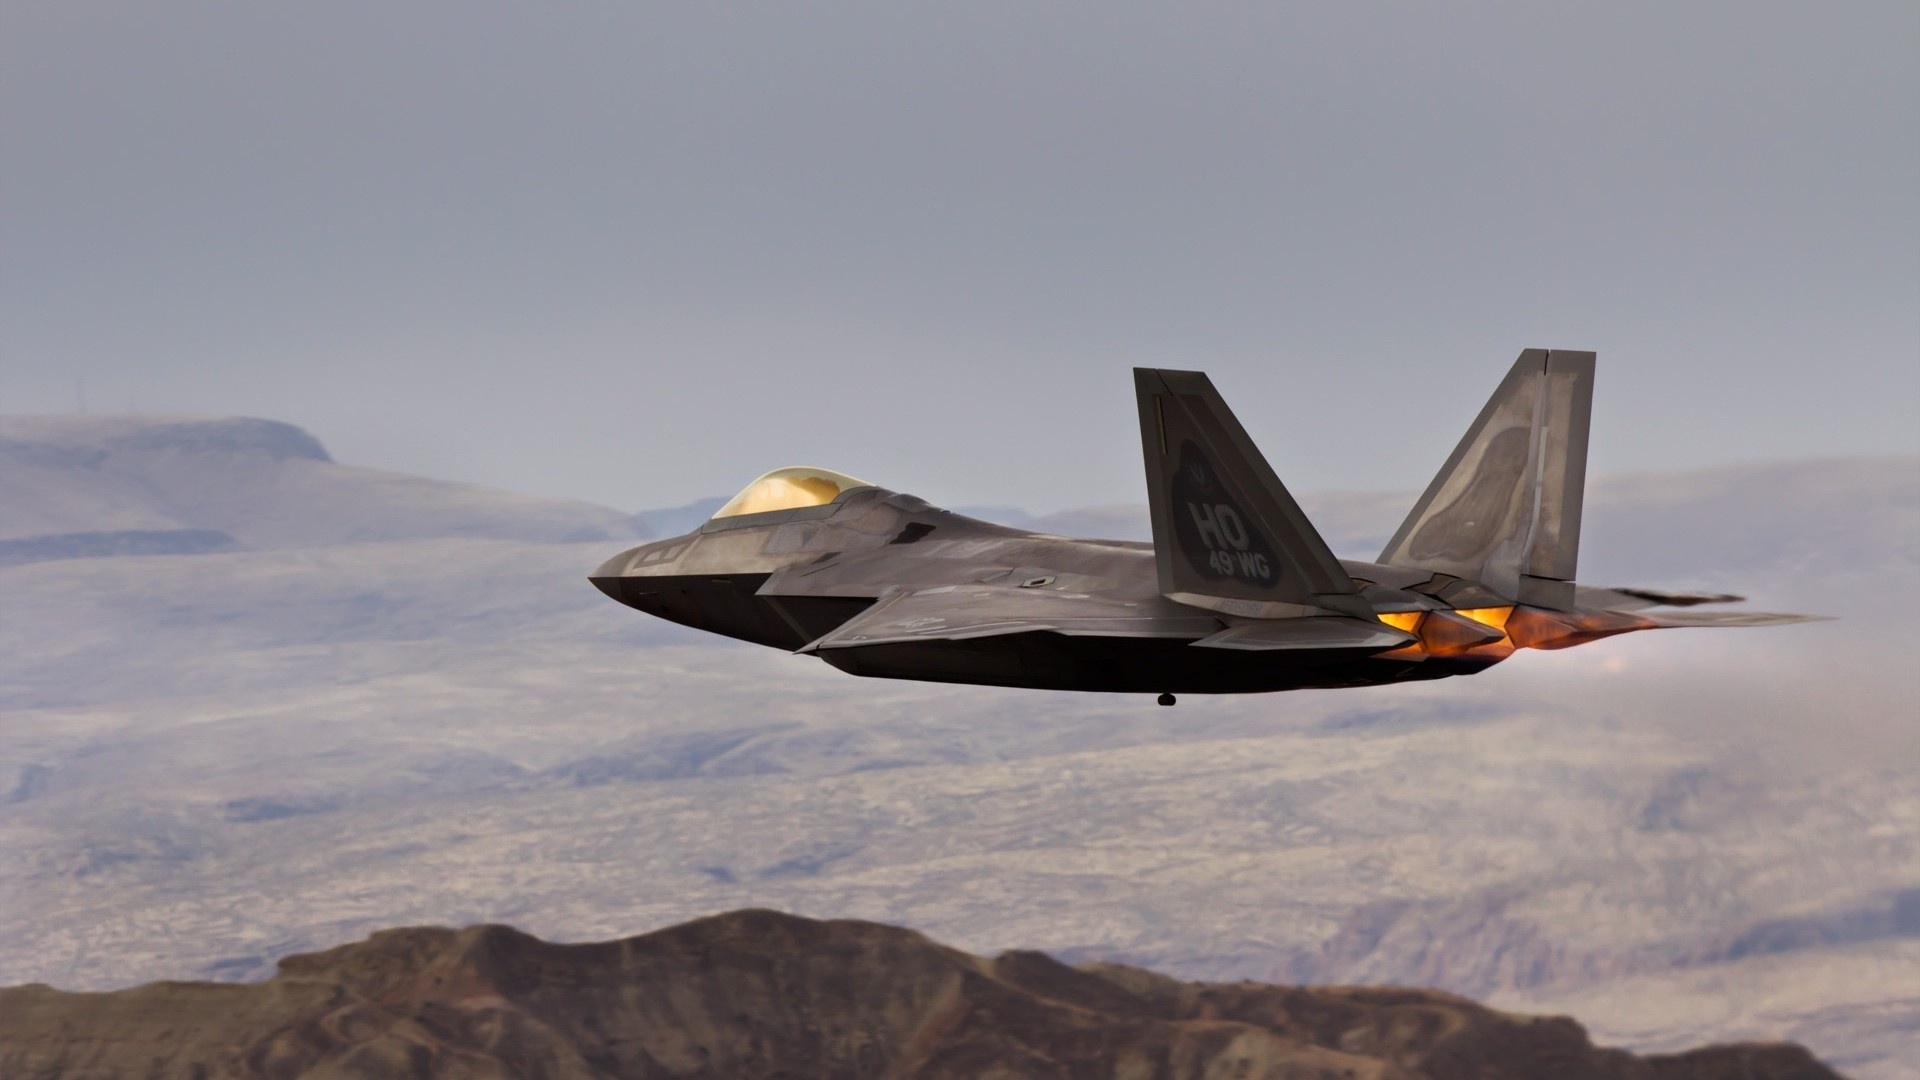 F-22 Raptor, Military aircraft, Mountainous landscapes, Air force, 1920x1080 Full HD Desktop